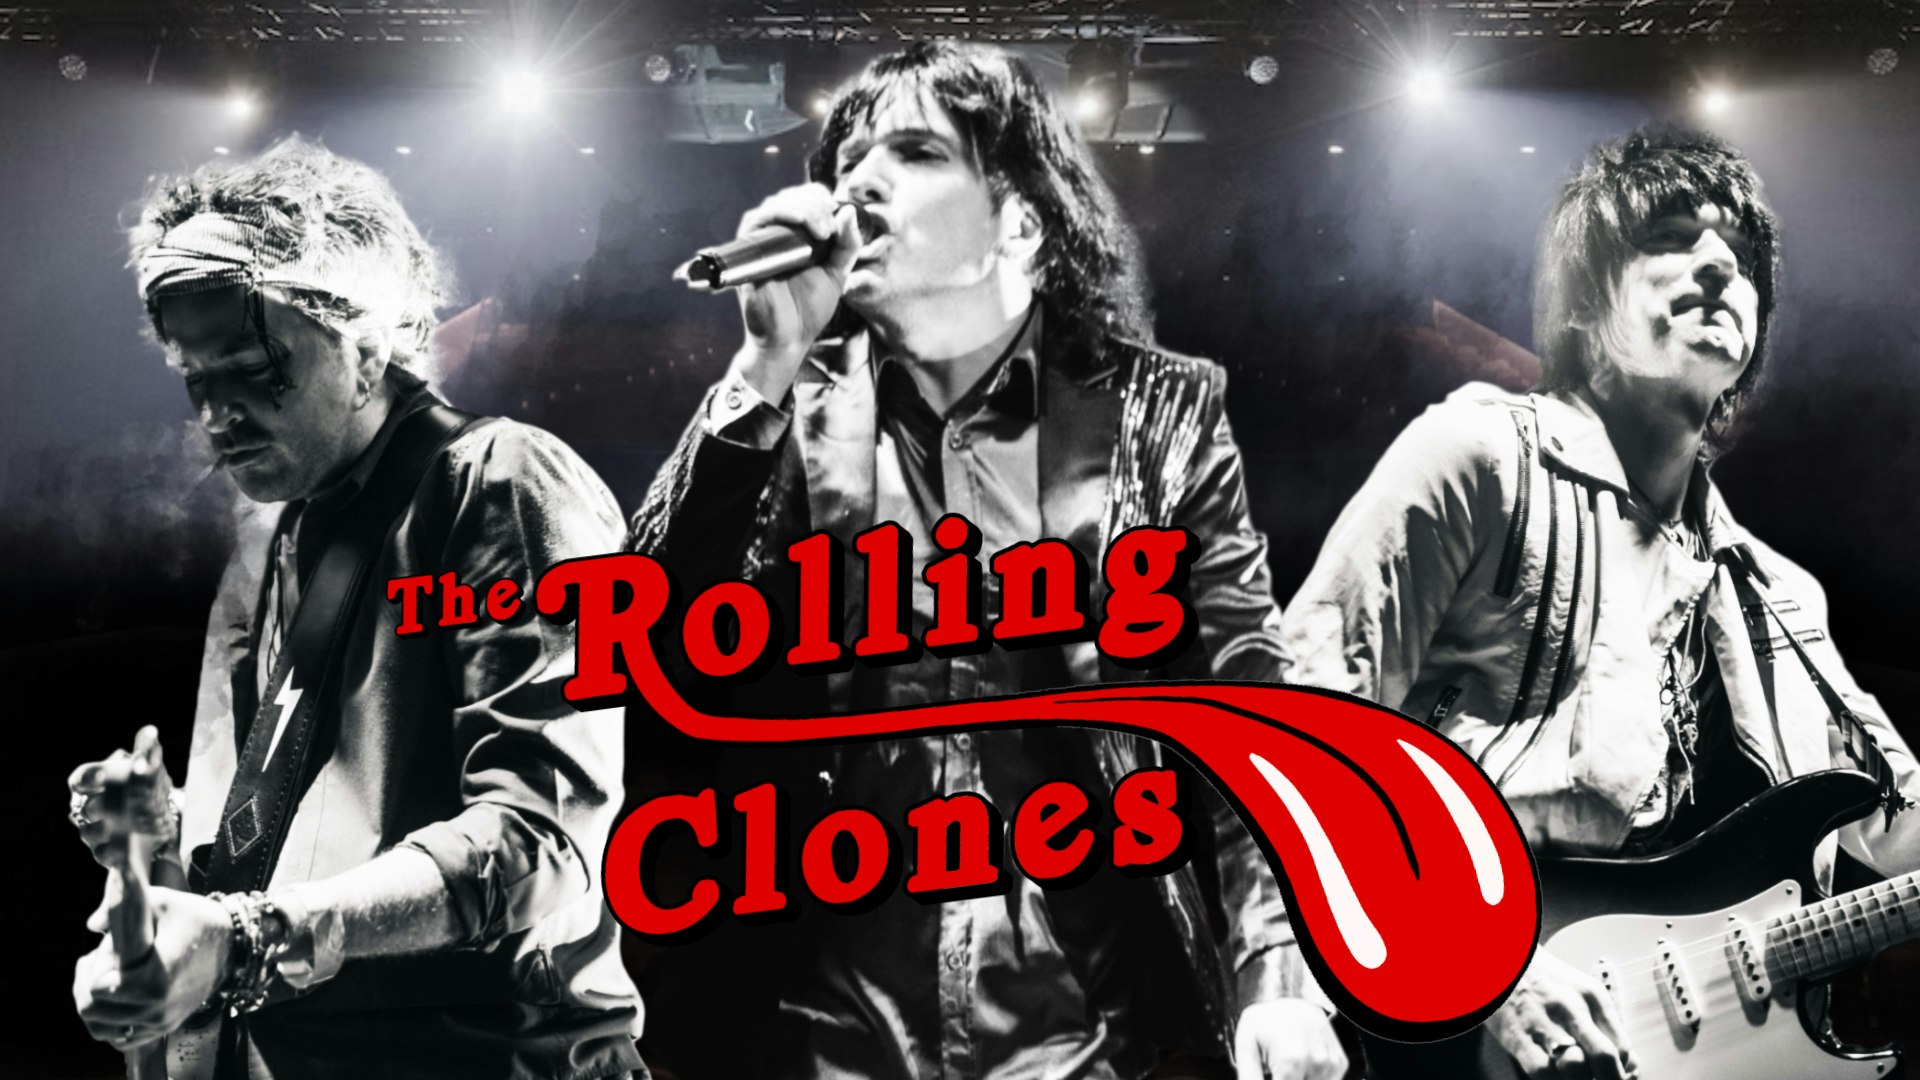 THE ROLLING STONES GREATEST HITS with World Famous tribute The Rolling Clones